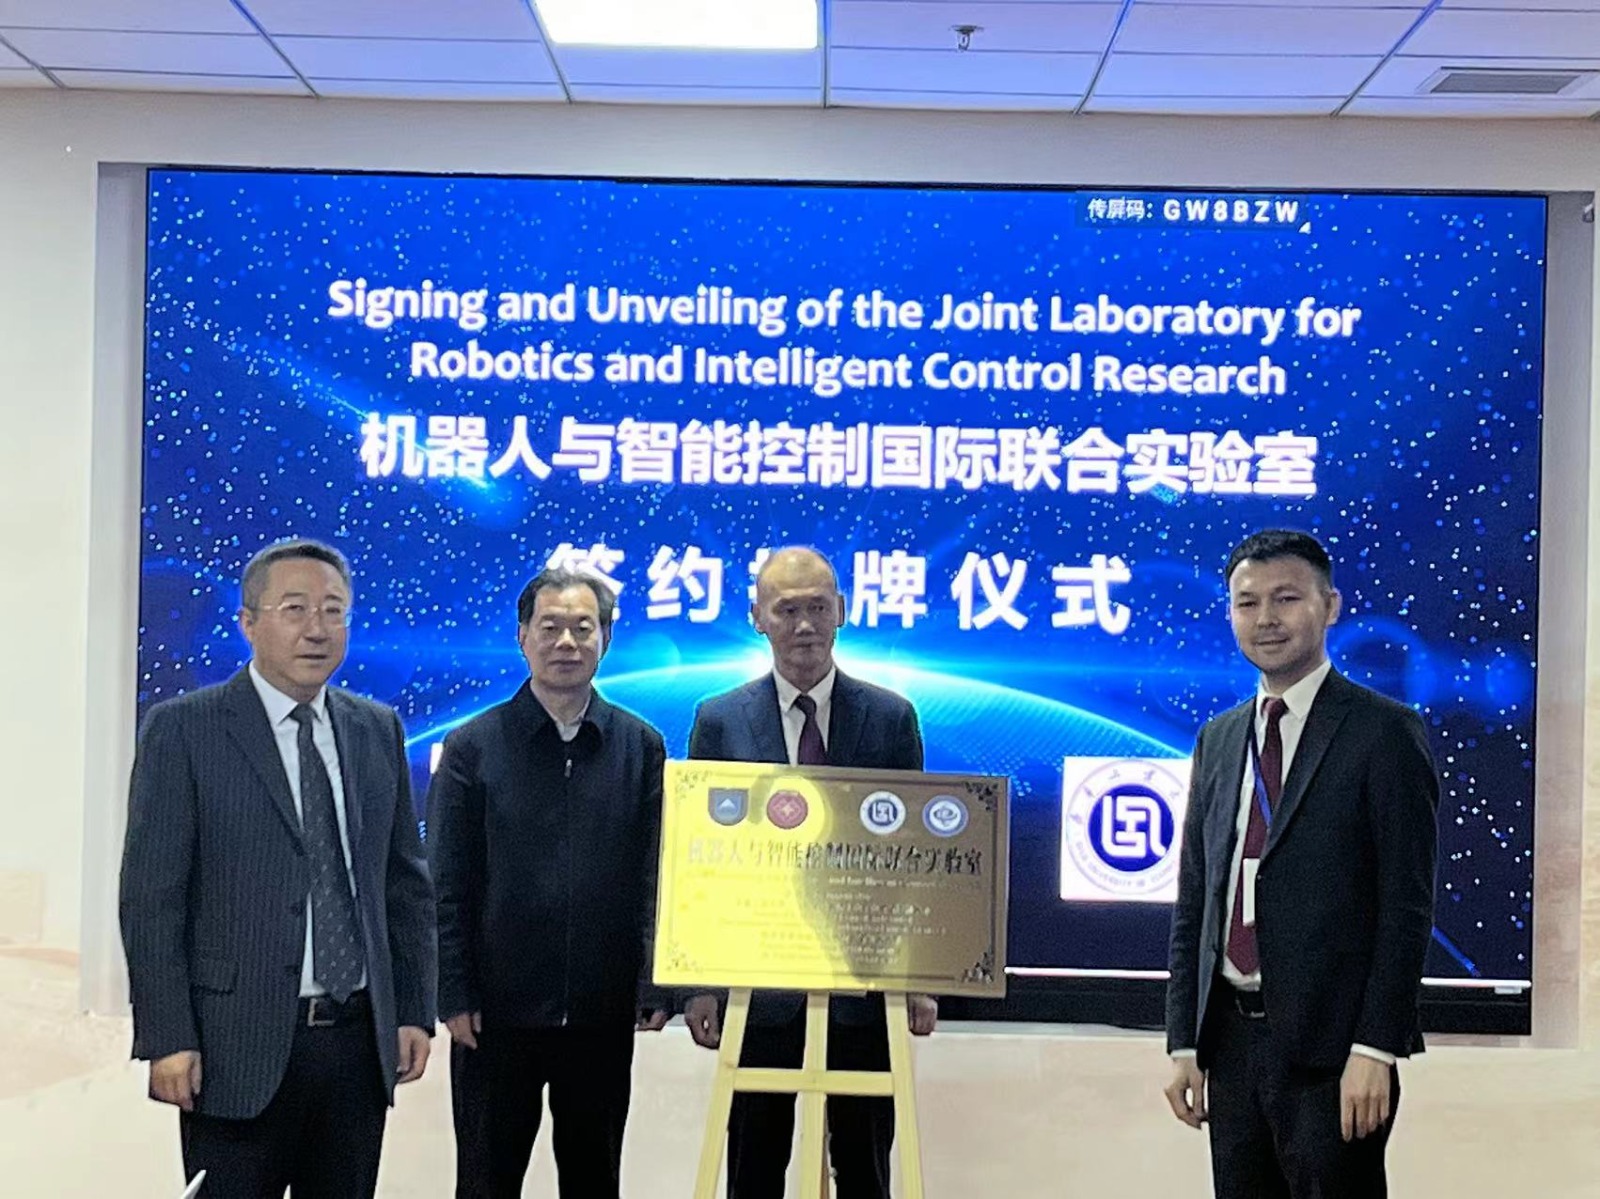 Opening ceremony of the joint laboratory "Joint laboratory for Robotics and Intelligent Control Research" between the Faculty of Electronics, Electrical and Control Engineering from Qilu University of technology (Shandong Academy of Sciences) and the Faculty of Mechanics and Mathematics of Al-Farabi Kazakh National University.